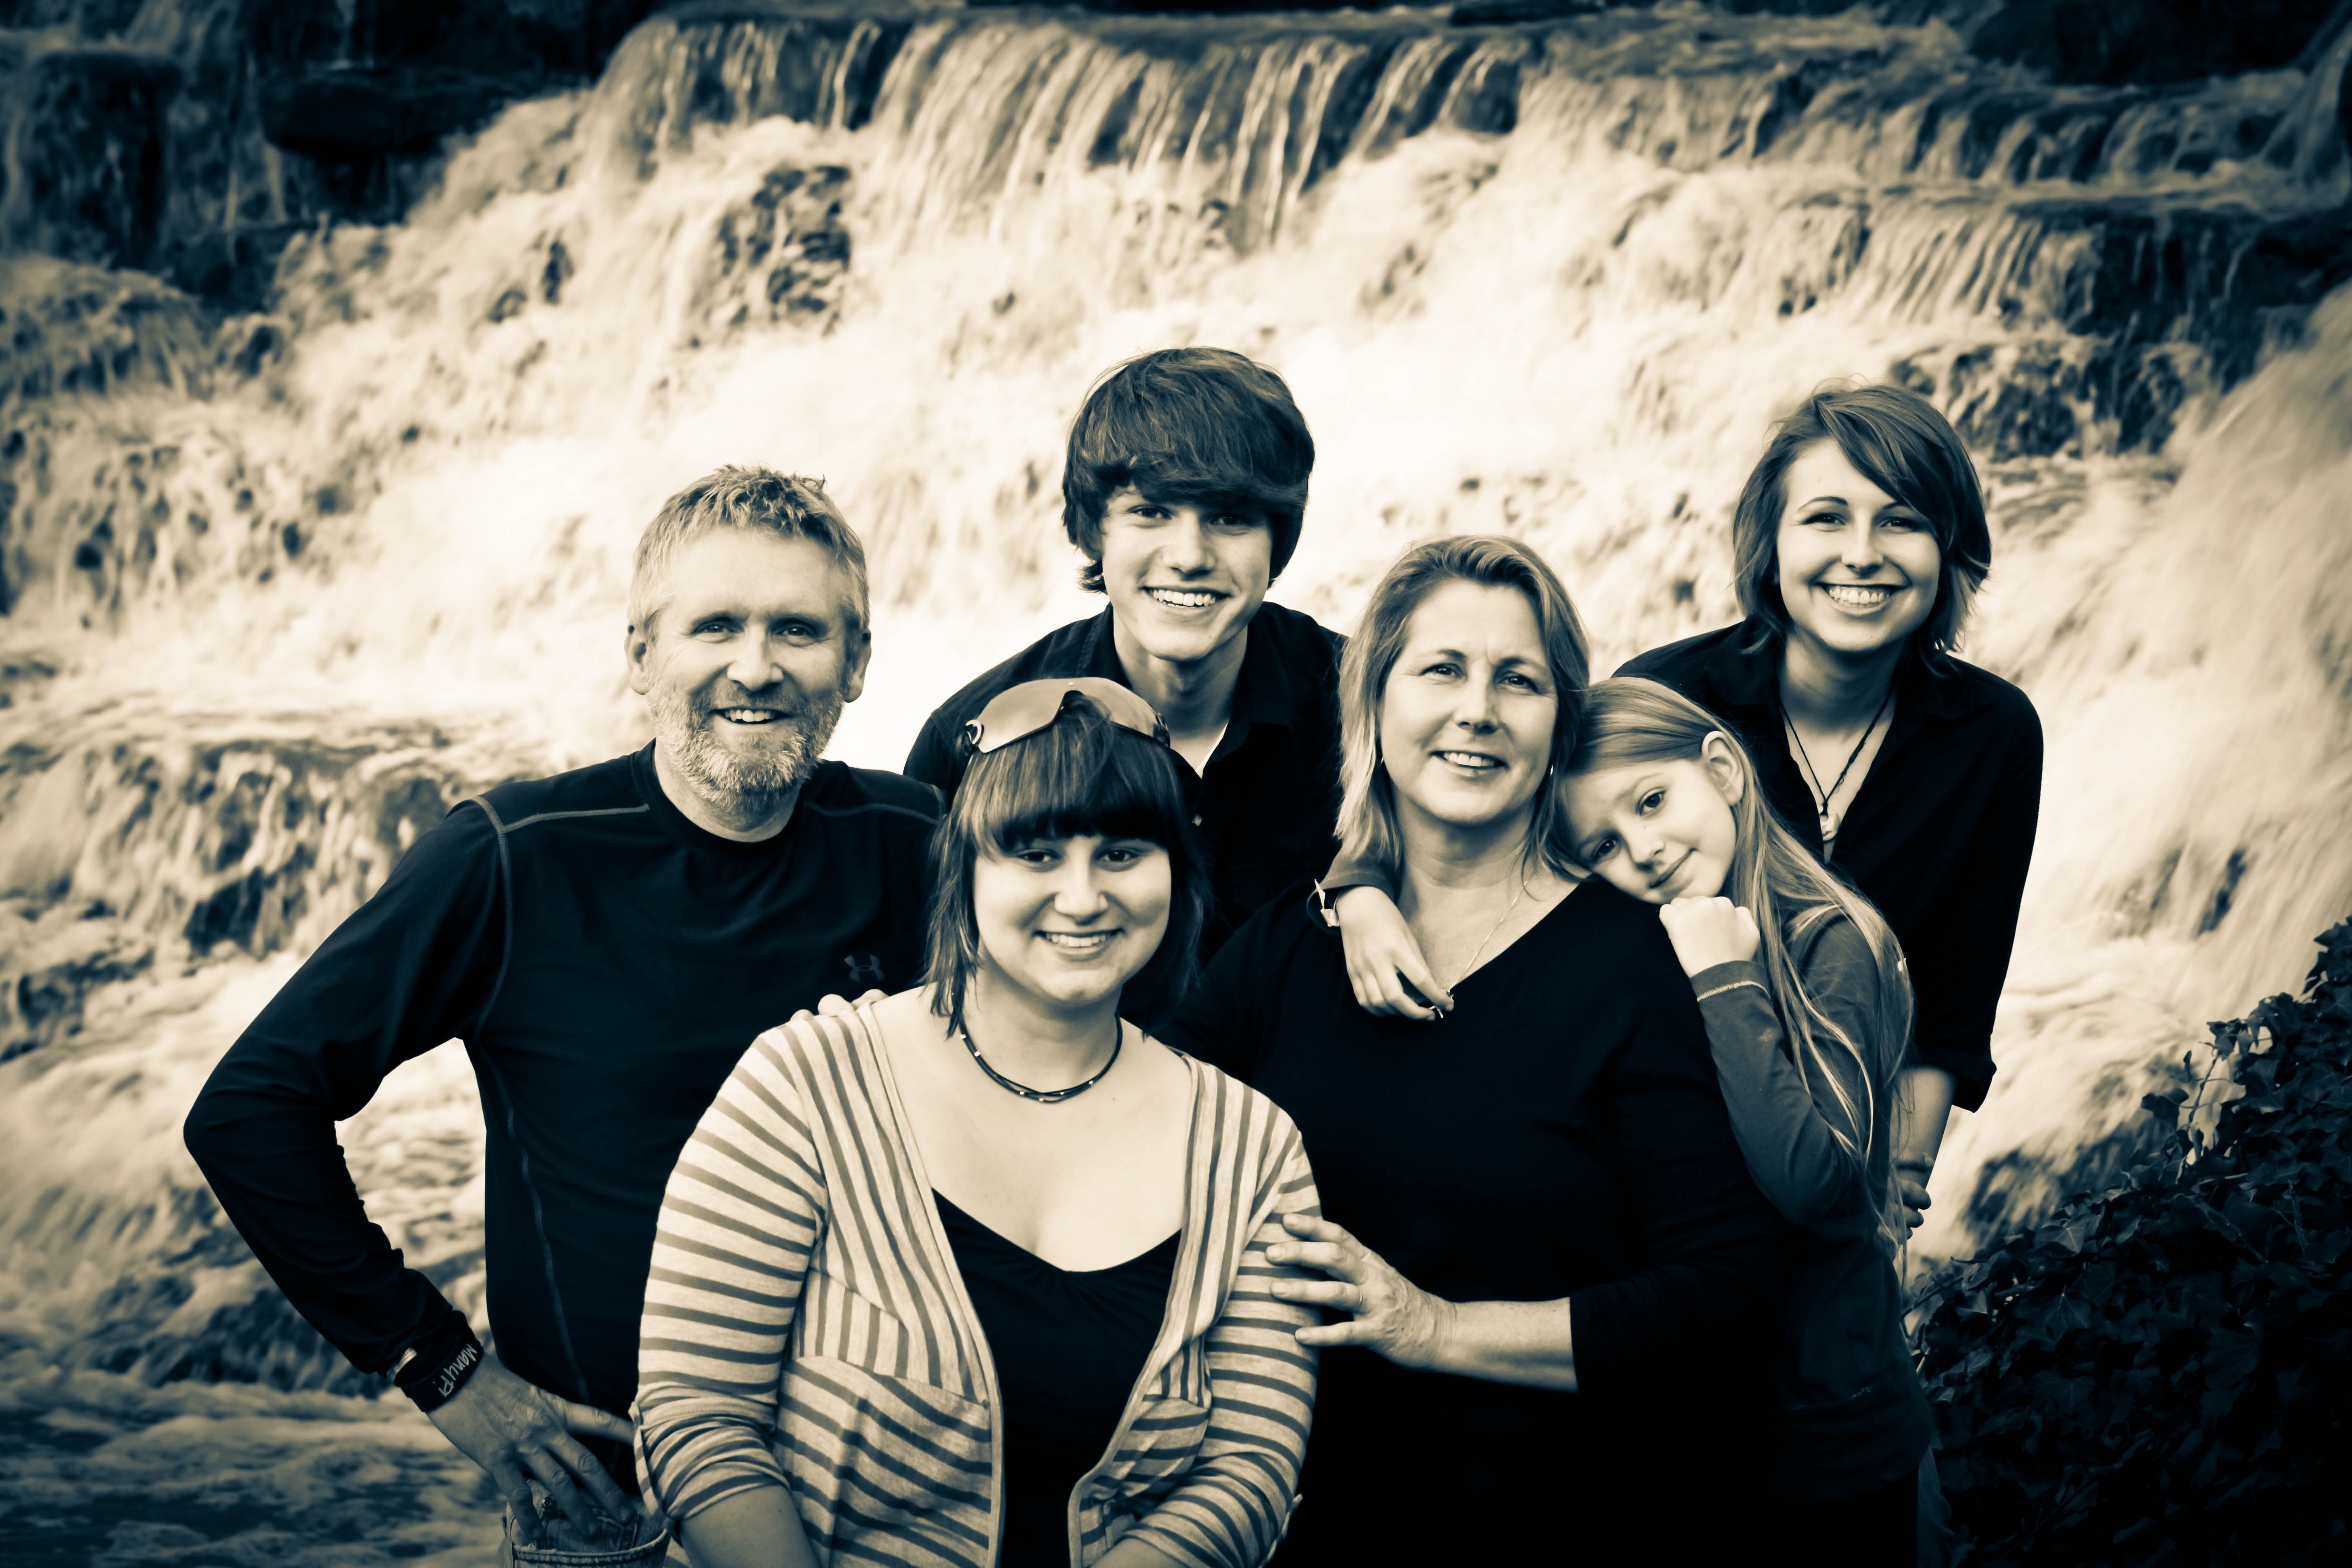 Our larger family as of January 2012...l to r (Kevin, Alycia, Jeremy, Marcy, Maggie, Meghan